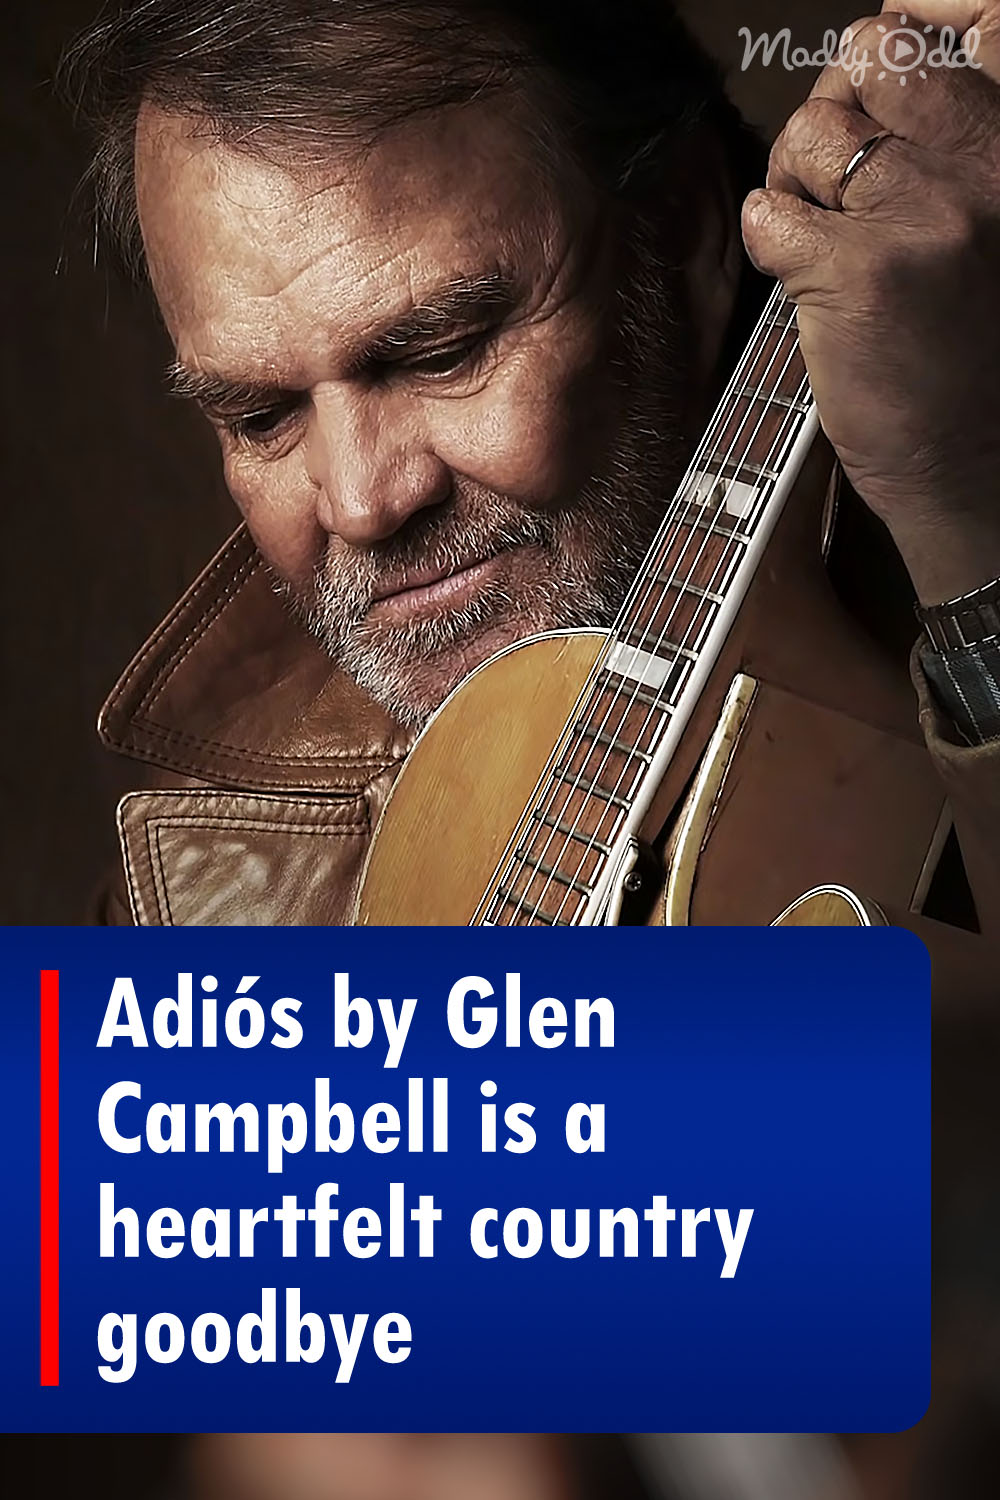 Adiós by Glen Campbell is a heartfelt country goodbye